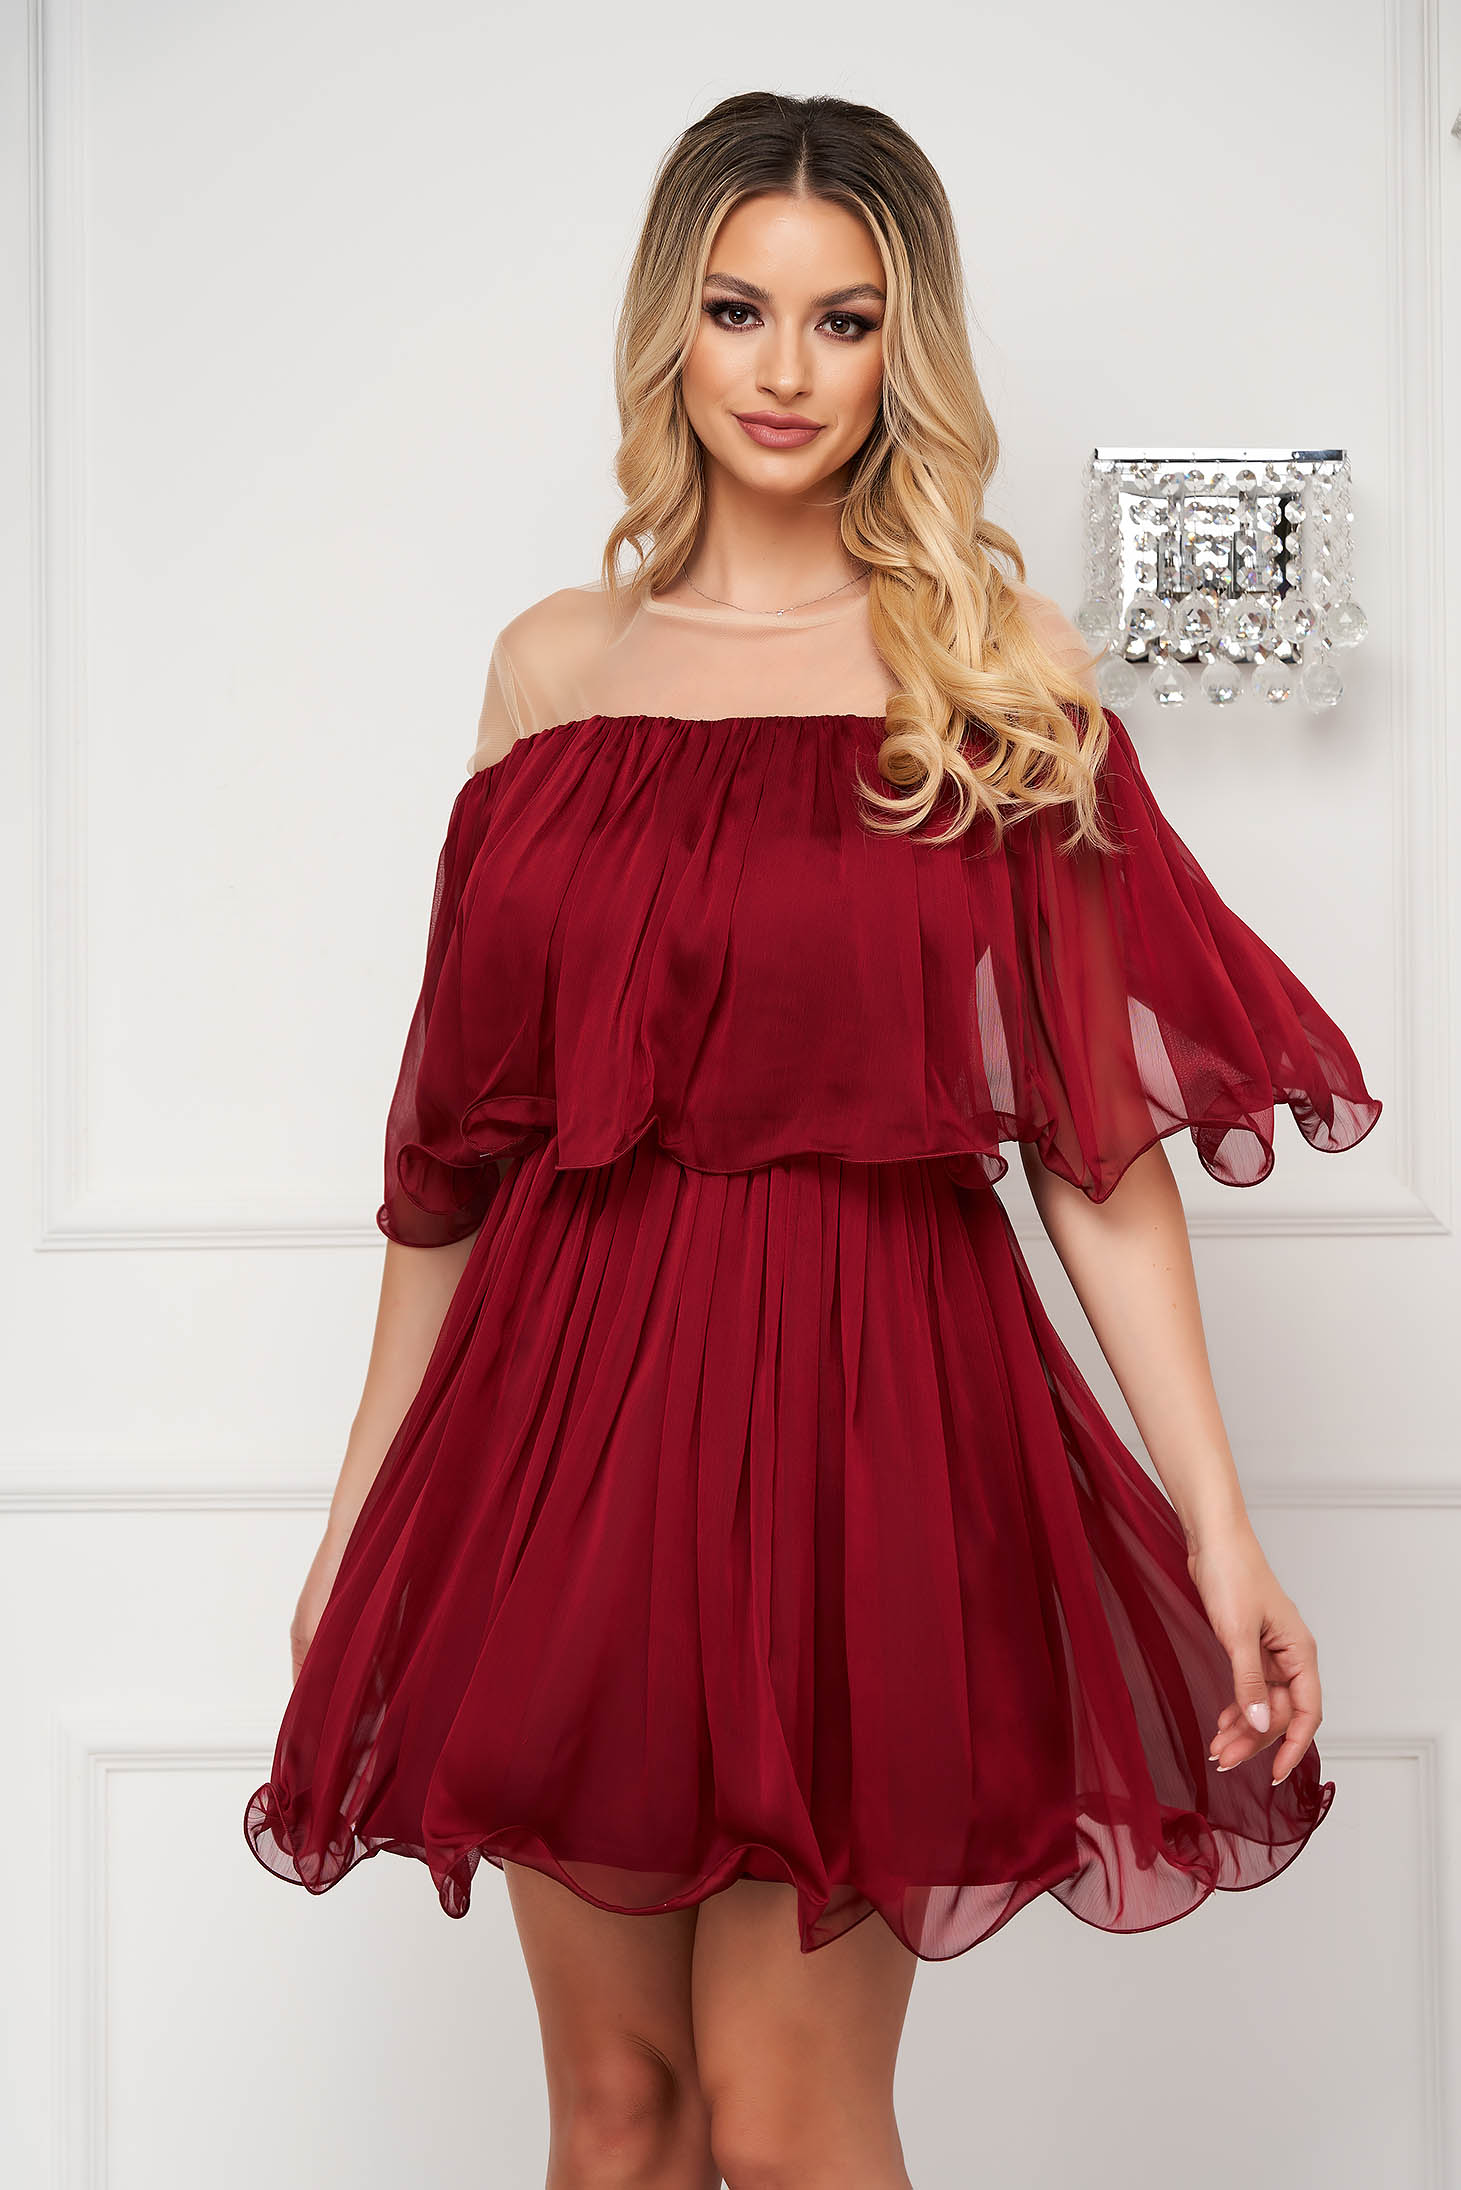 Short cherry-colored dress made of thin material in a flared style with bare shoulders - Artista